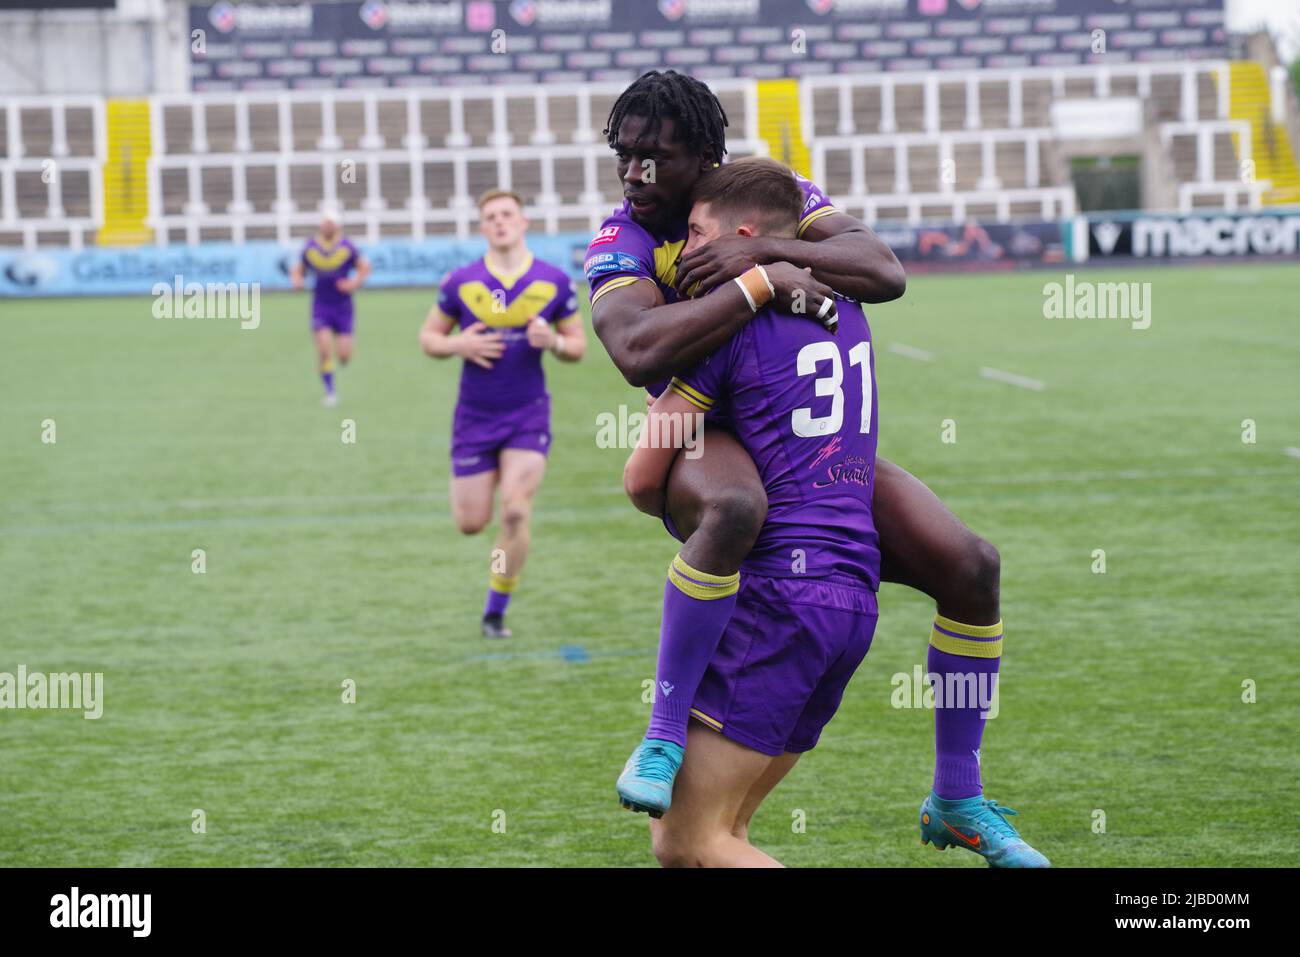 Newcastle, England, 5 June 2022. Gideon Boafo congratulating Riley Dean after he scored a try for Newcastle Thunder against Sheffield Eagles in the Betfred Championship at Kingston Park. Credit: Colin Edwards / Alamy Live News Stock Photo